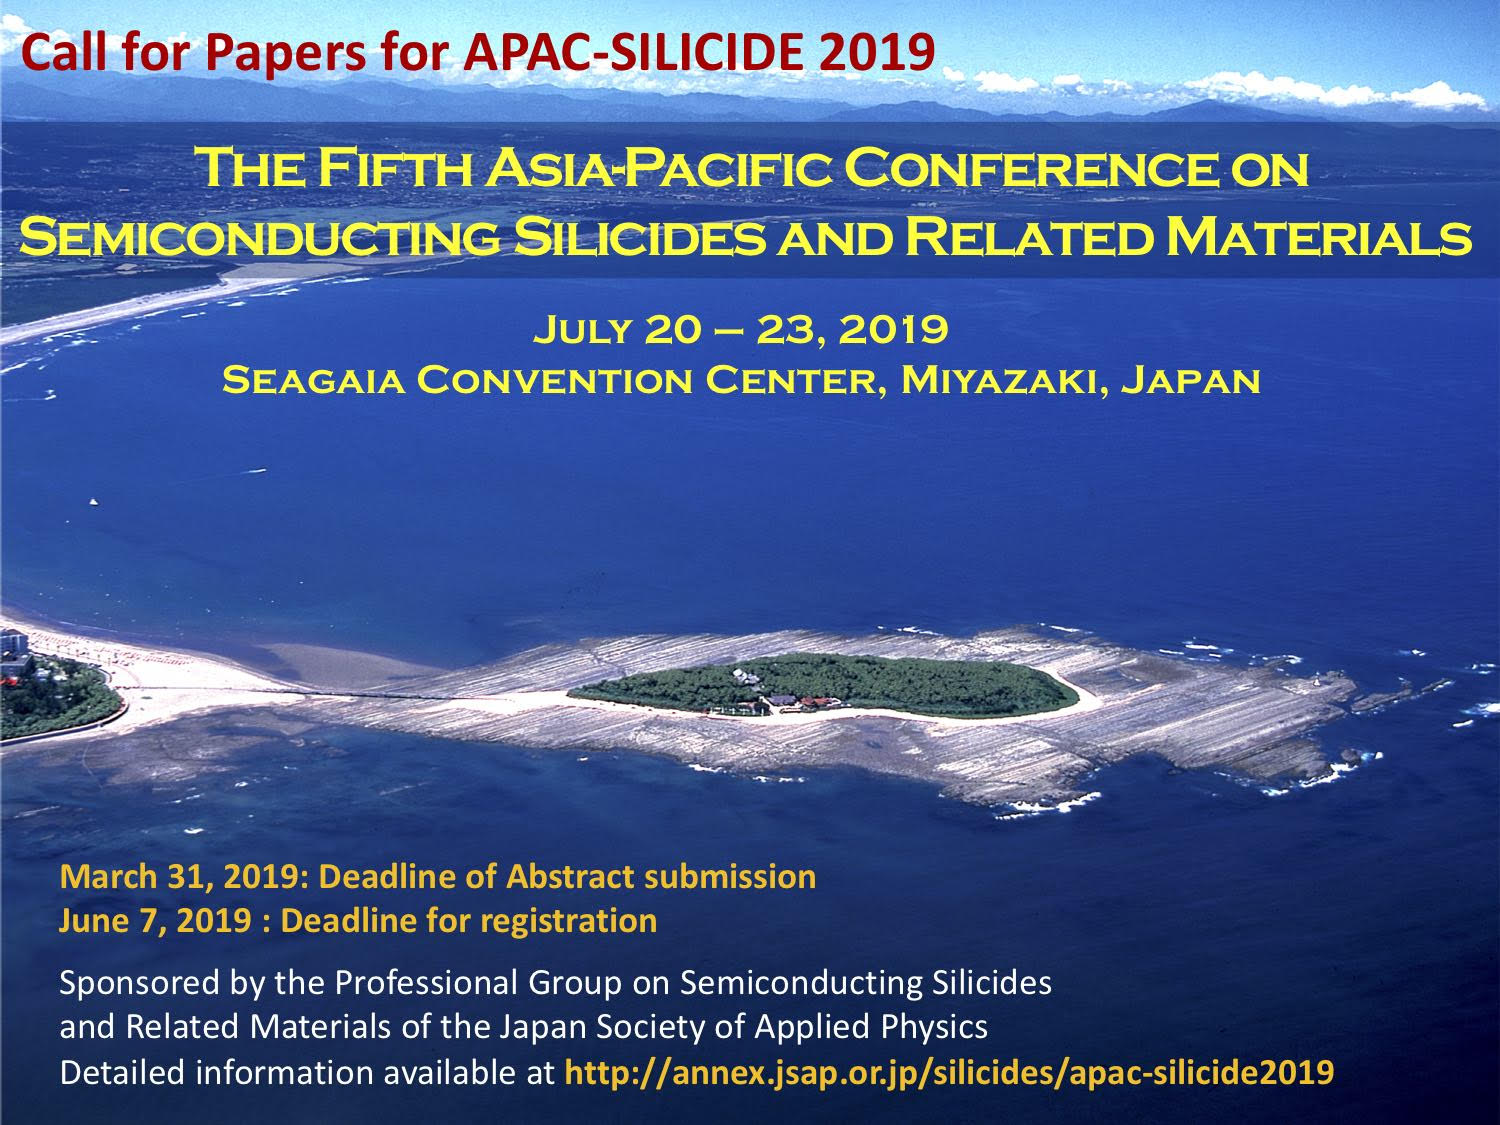 Call for papers - APAC SILICIDE 2019